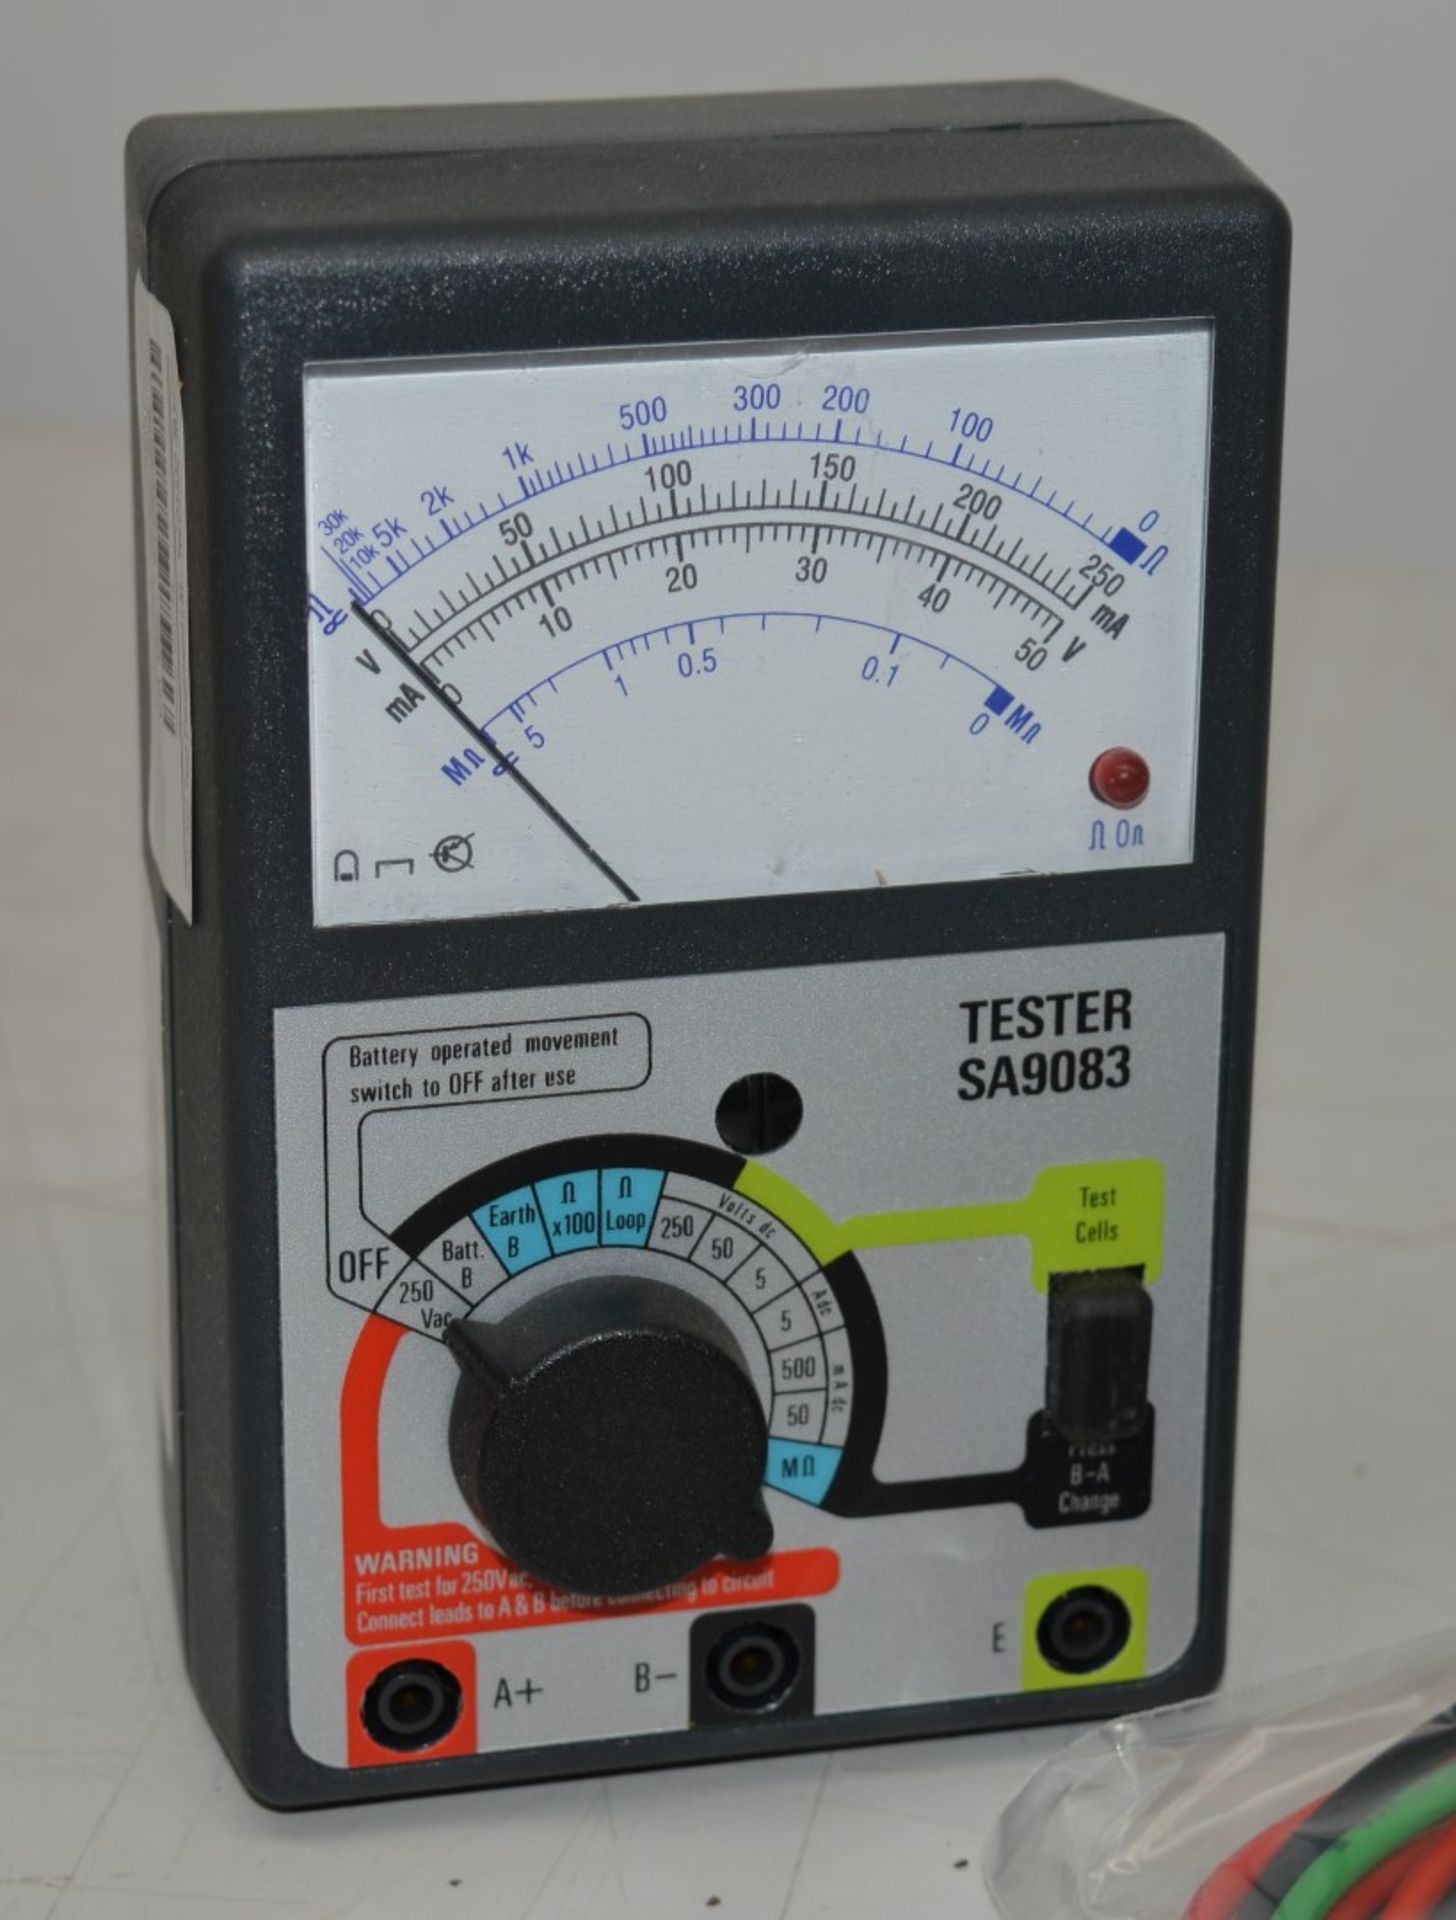 1 x Mills SA9083 Multimeter - Suitable For Telephone Engineers in Maintenance Testing - With Carry - Image 3 of 4